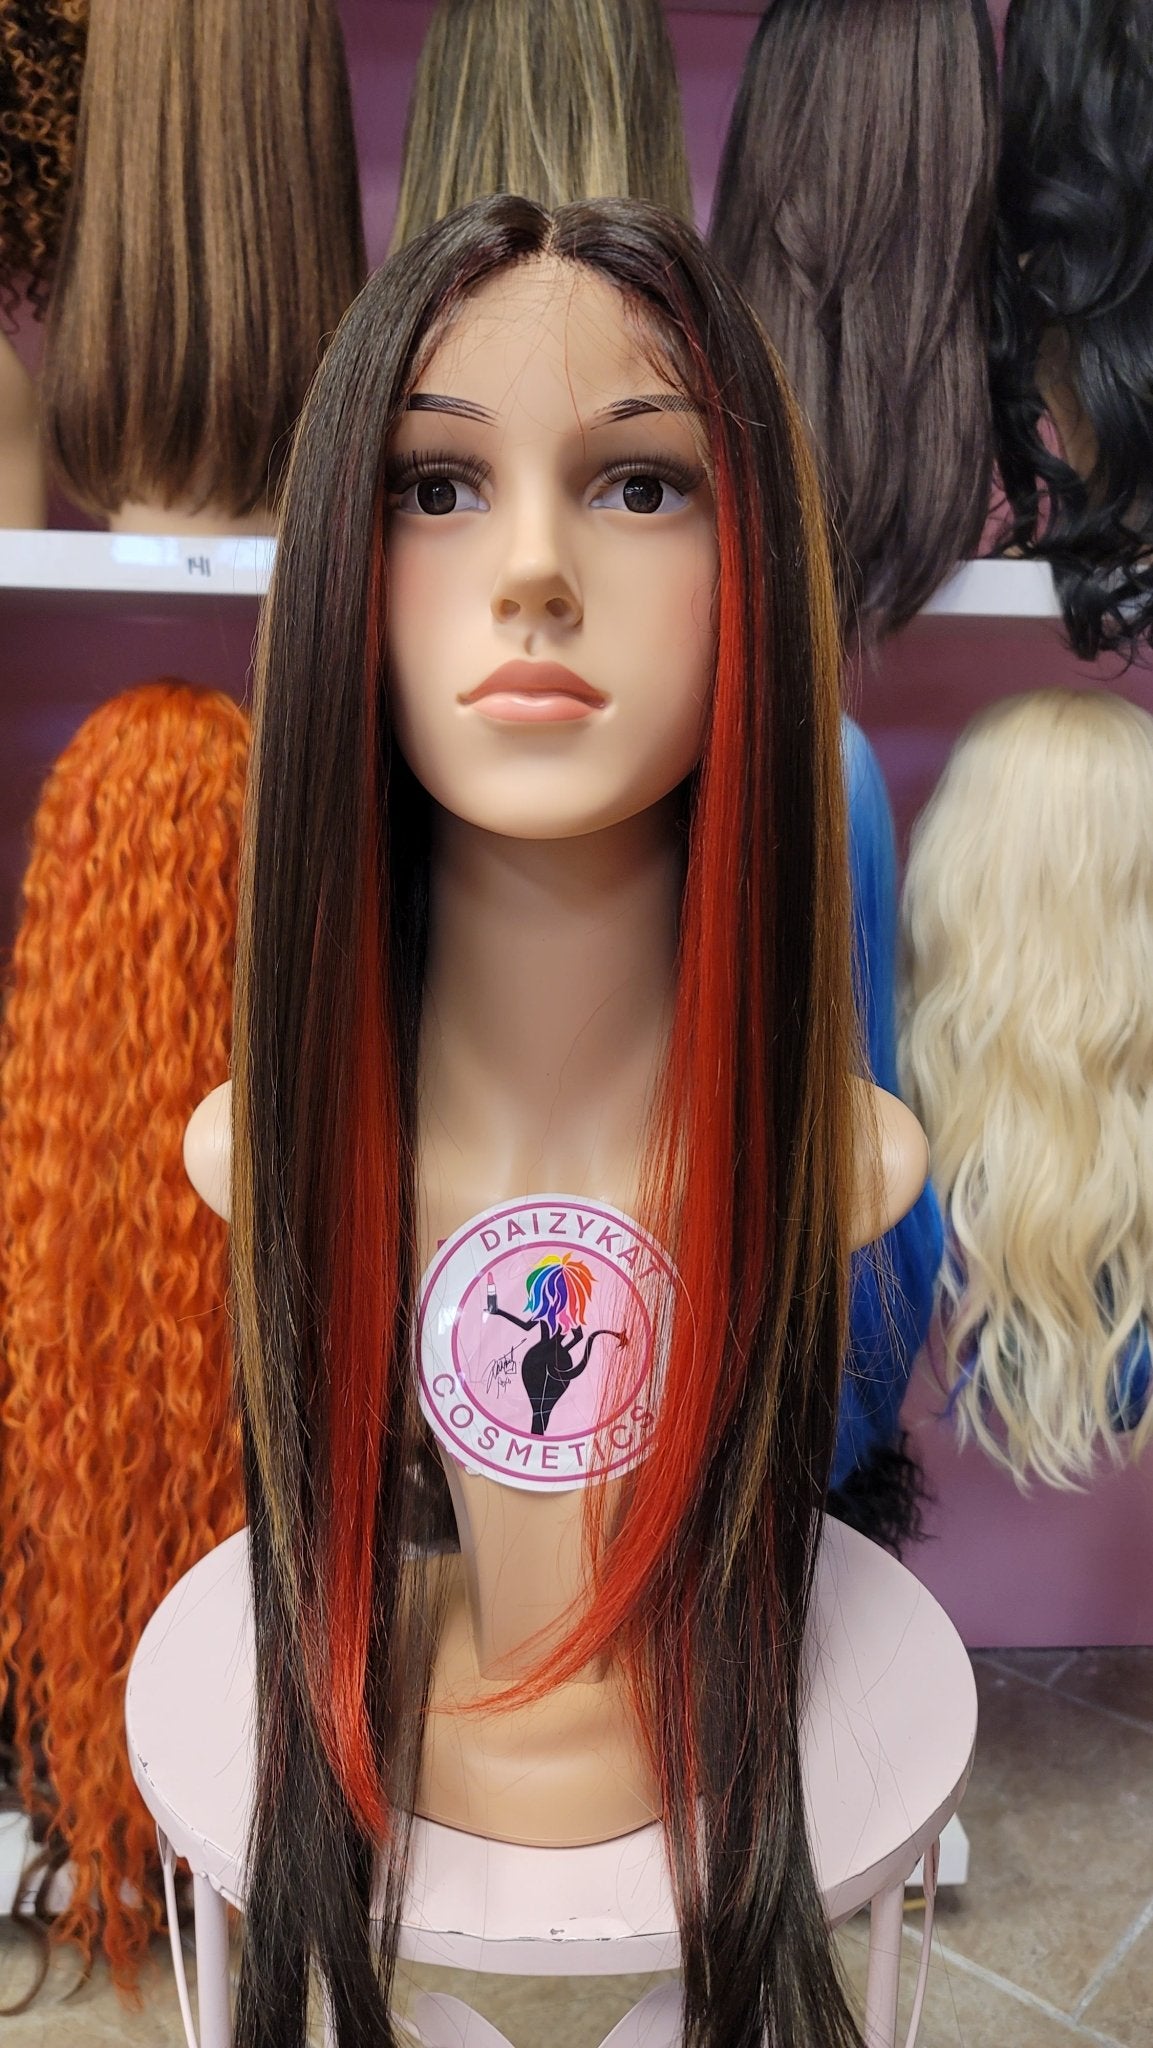 183 KELLY - Middle Part Lace Front Wig Human Hair Blend- 4/RD/GLD - DaizyKat Cosmetics 183 KELLY - Middle Part Lace Front Wig Human Hair Blend- 4/RD/GLD DaizyKat Cosmetics Wigs